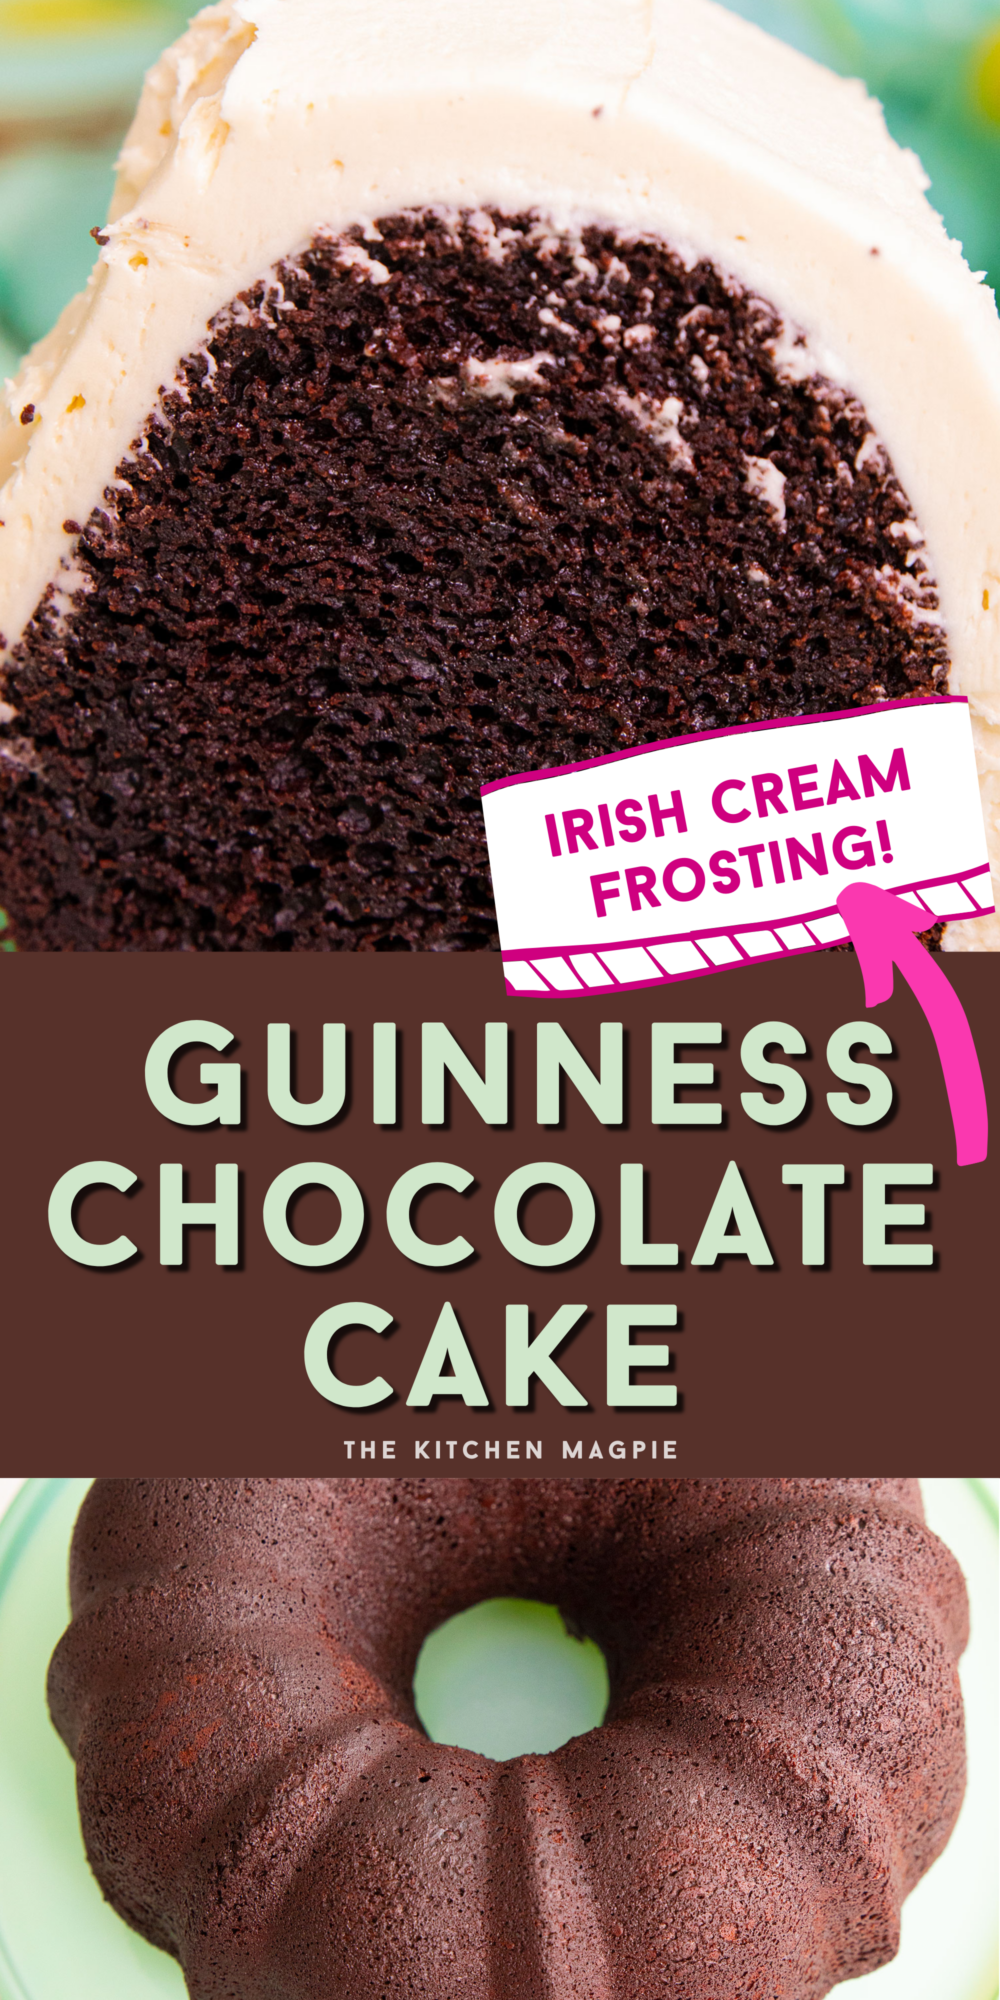 Guinness® makes this chocolate cake moist with deep chocolate flavor with hints of coffee and is topped with a decadent Irish cream buttercream frosting.